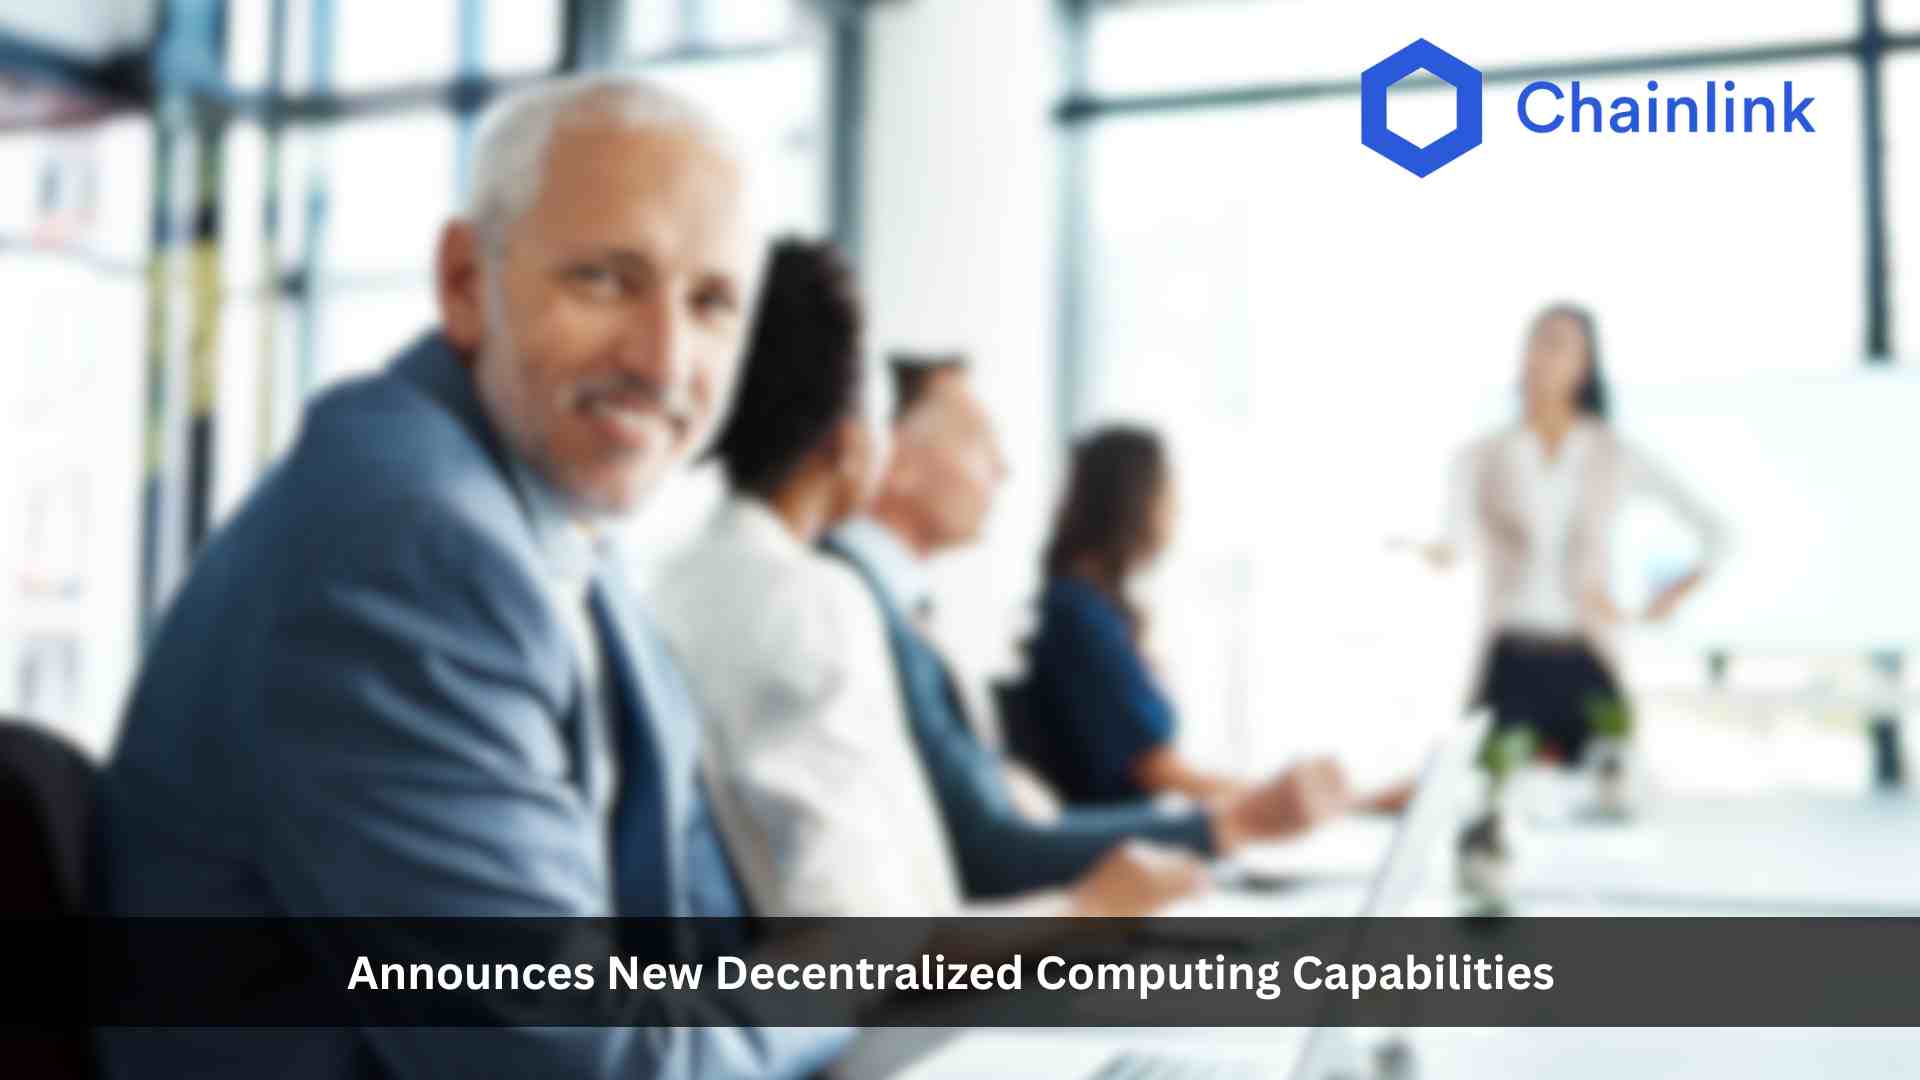 Chainlink Announces New Decentralized Computing Capabilities With Functions Beta and Automation 2.0 on Mainnet